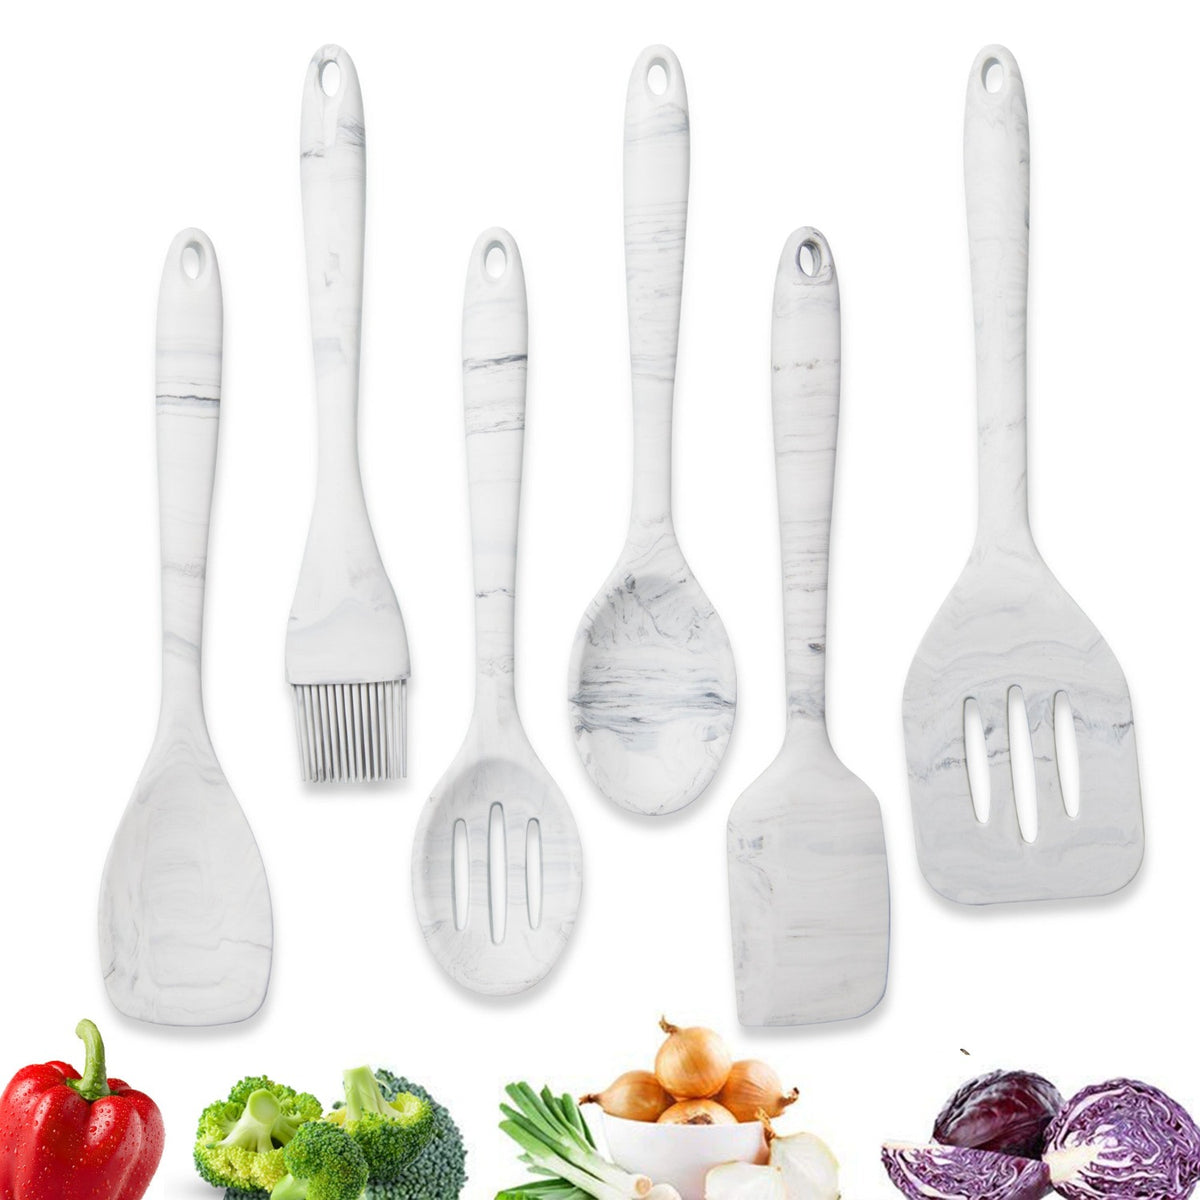 Hastings Home Kitchen Utensil and Gadget Set - 6 Piece Spatula and